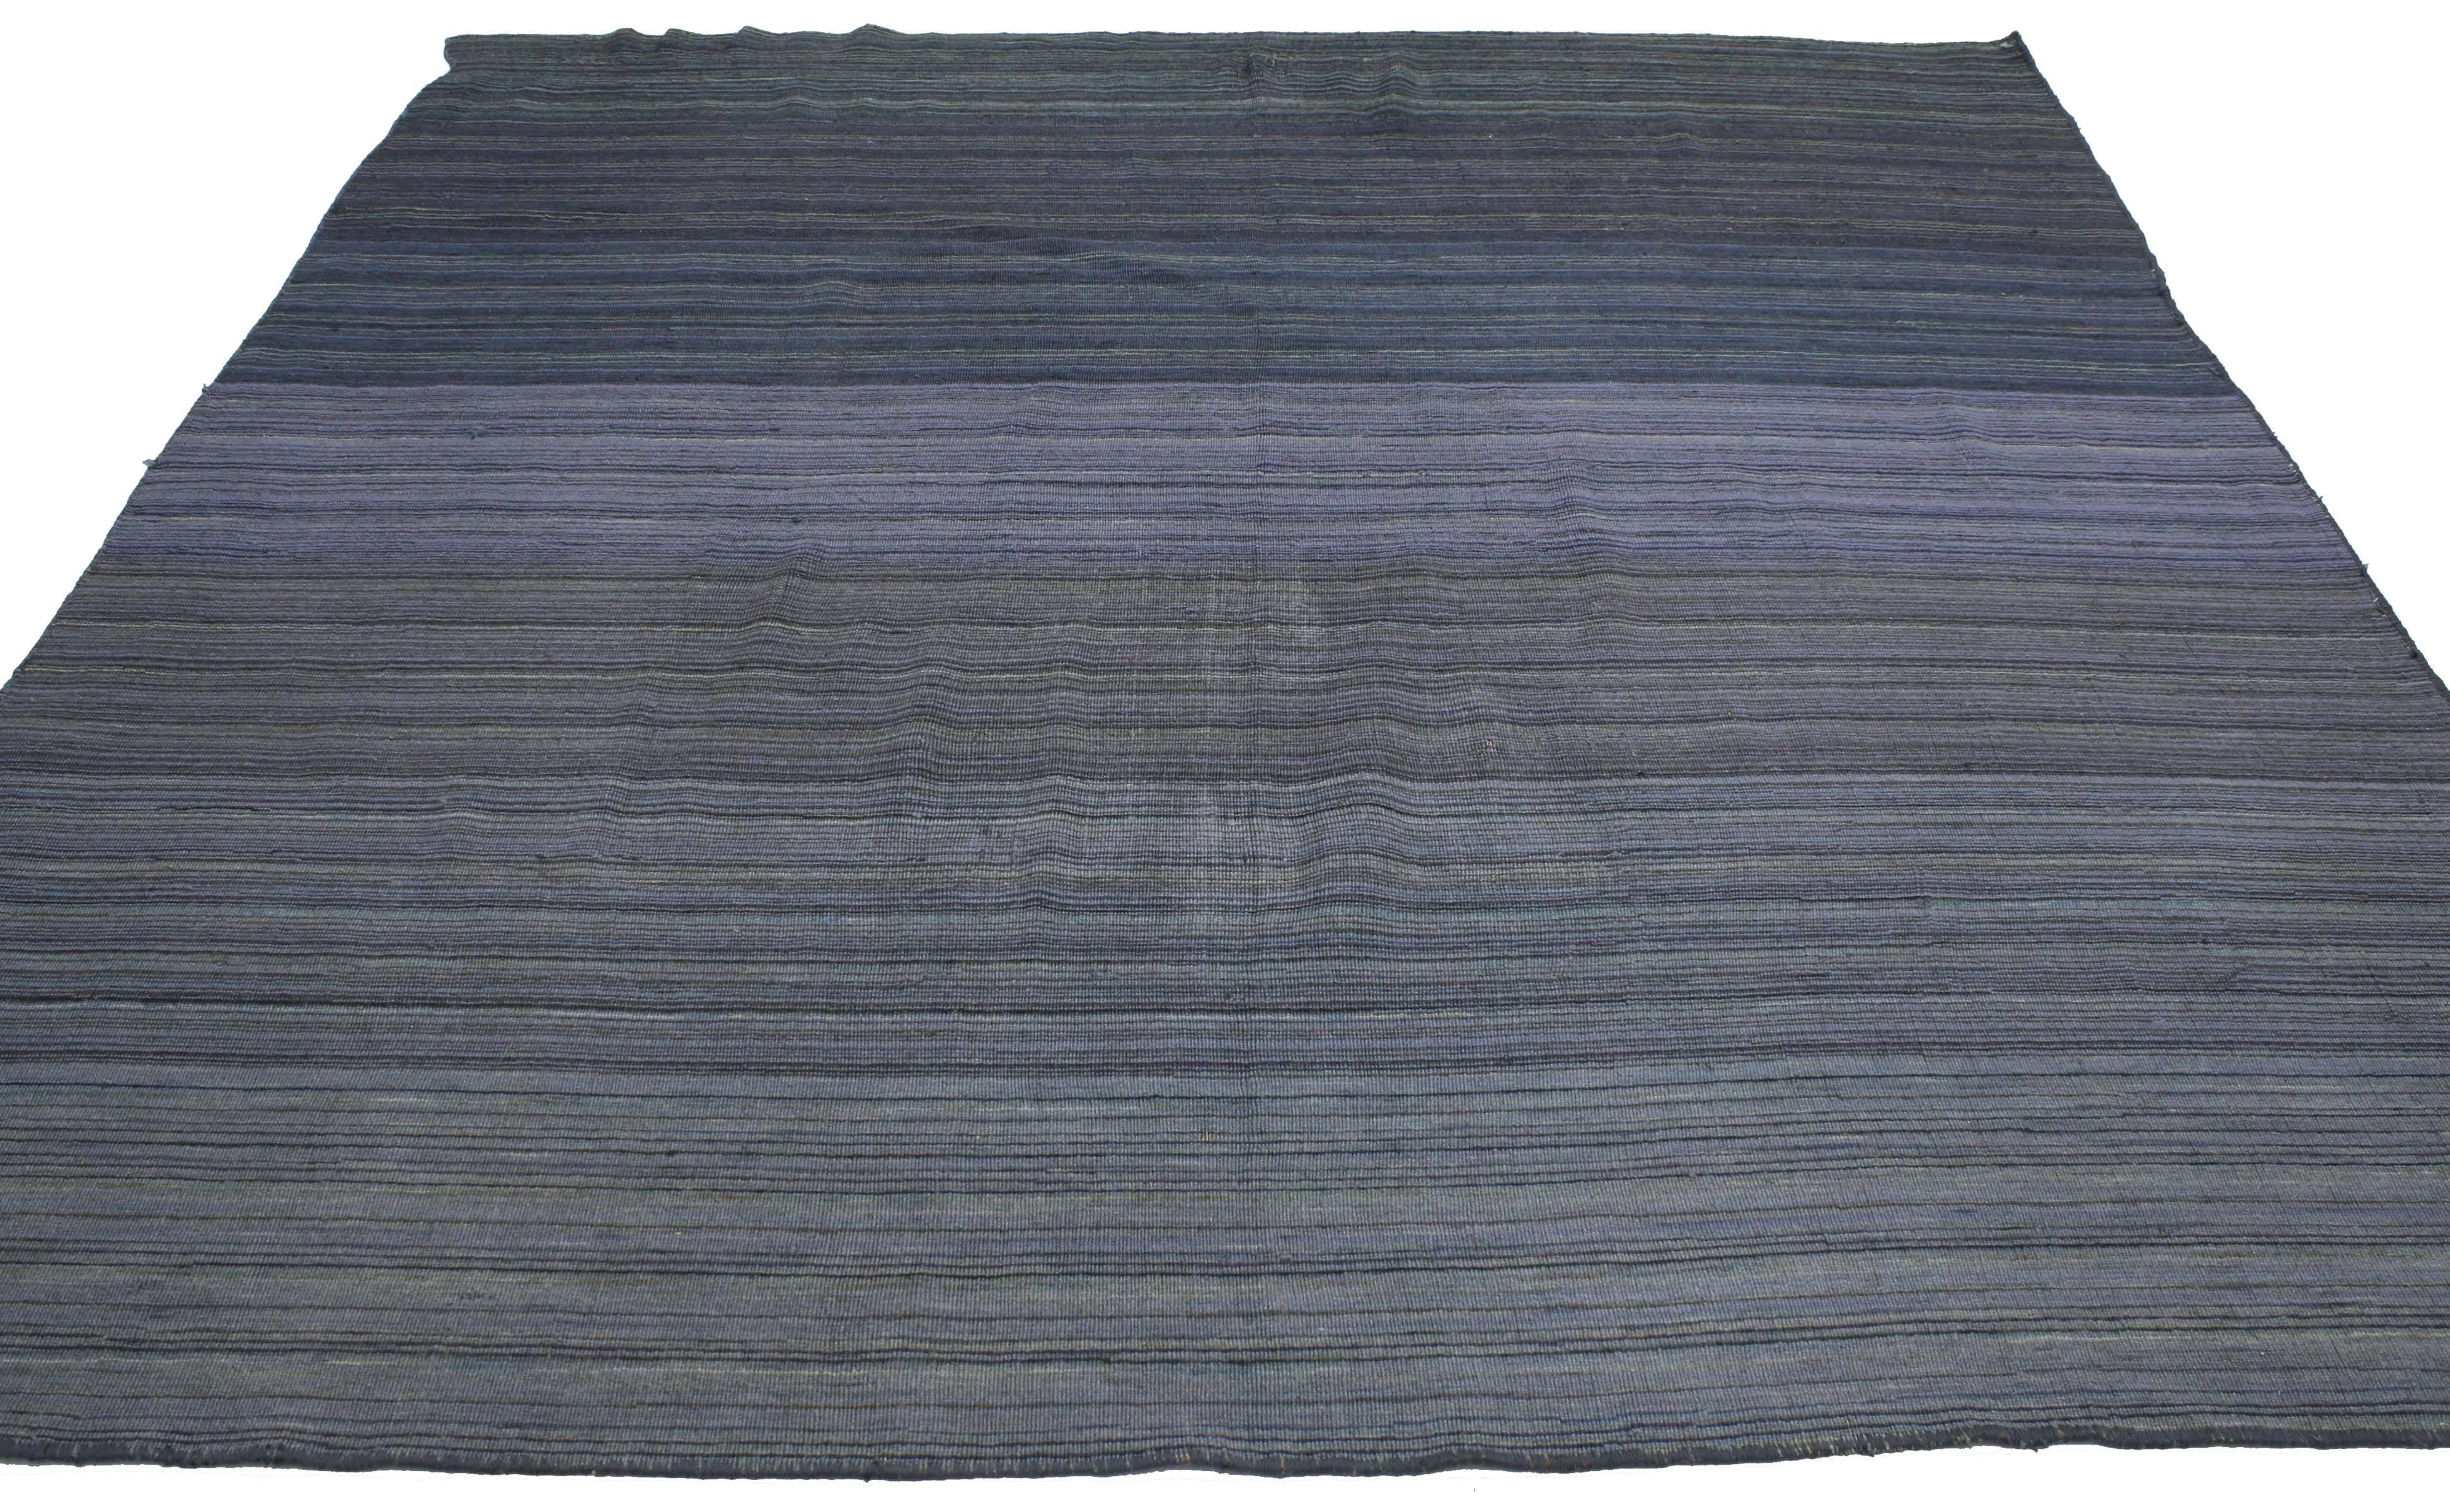 76908 Contemporary Modern Flat-Weave Rug, Ombre Kilim with Pastel Postmodern Style. Like a rippling infinity pool or an endless horizon, this contemporary modern flat-weave rug features an ombre design. Square rugs like this modern contemporary